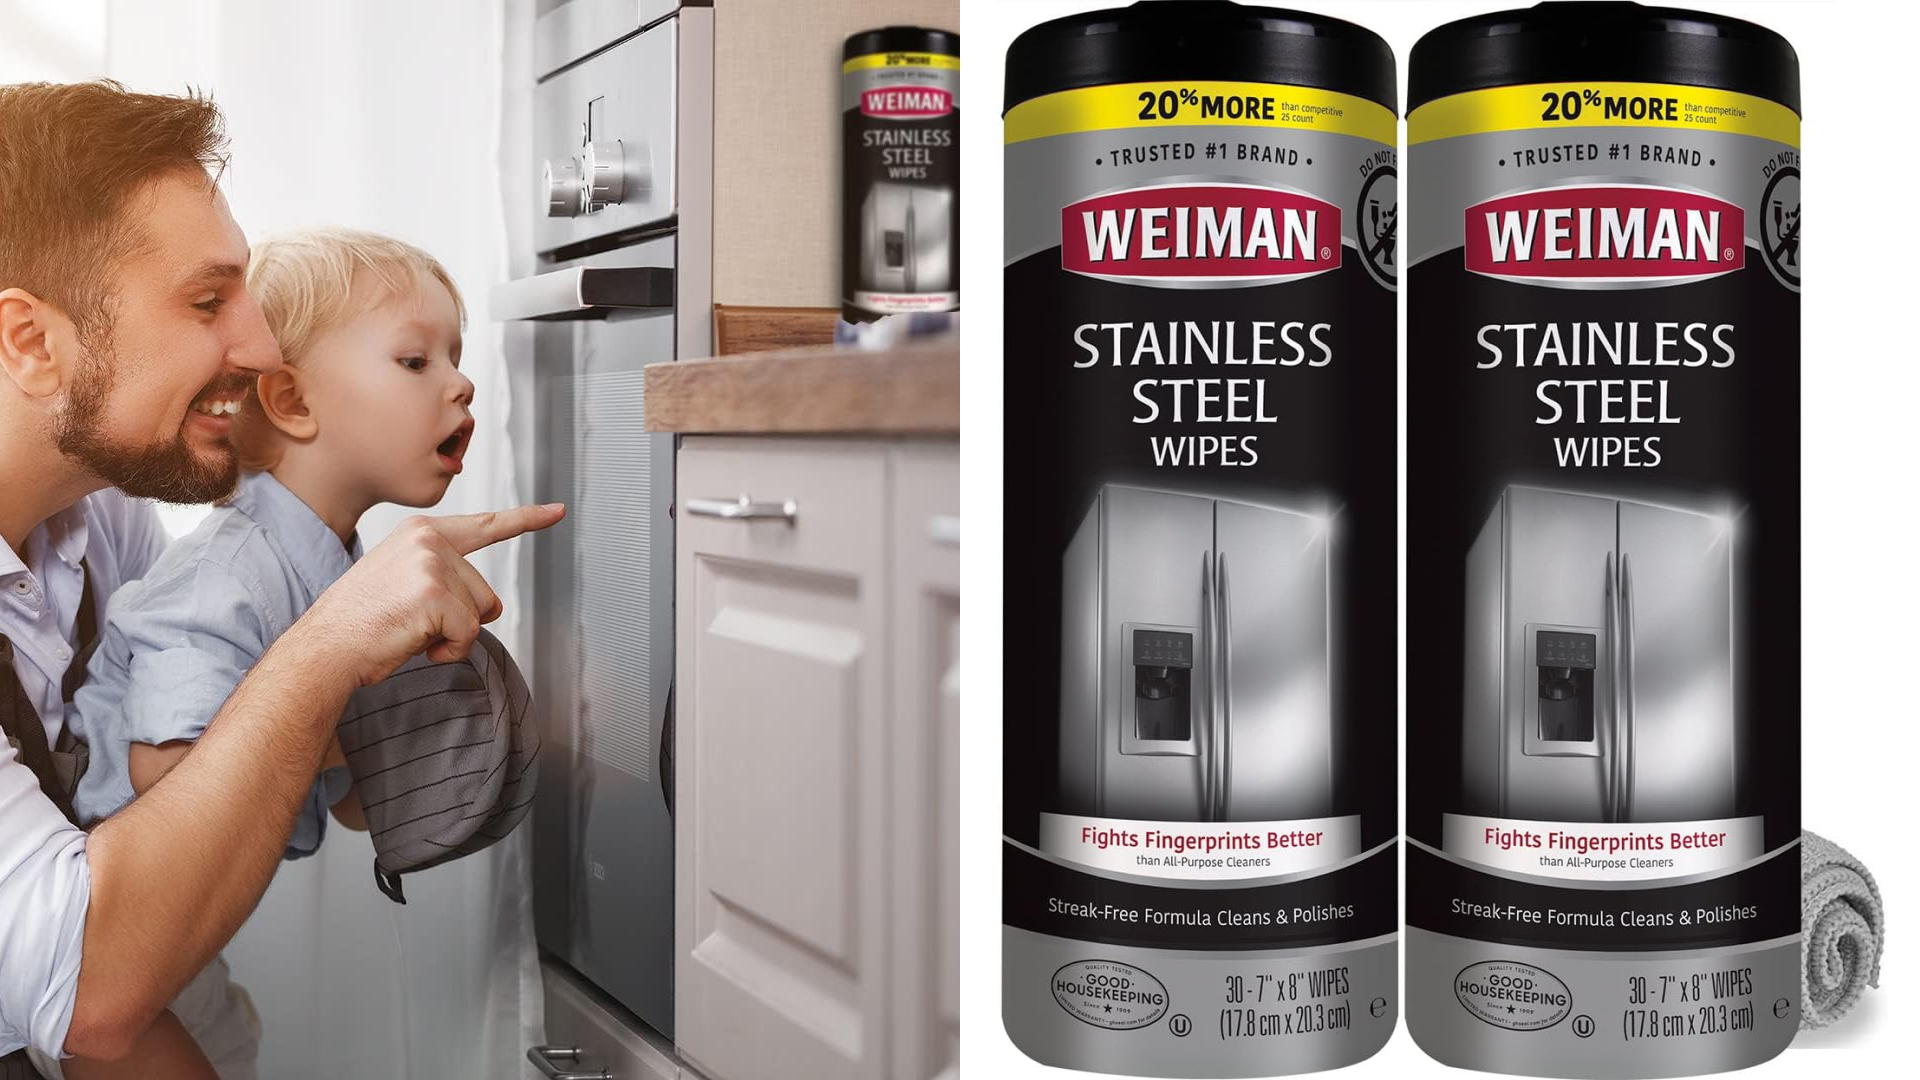 Weiman Stainless Steel Cleaner Wipes 30 Count Best Price